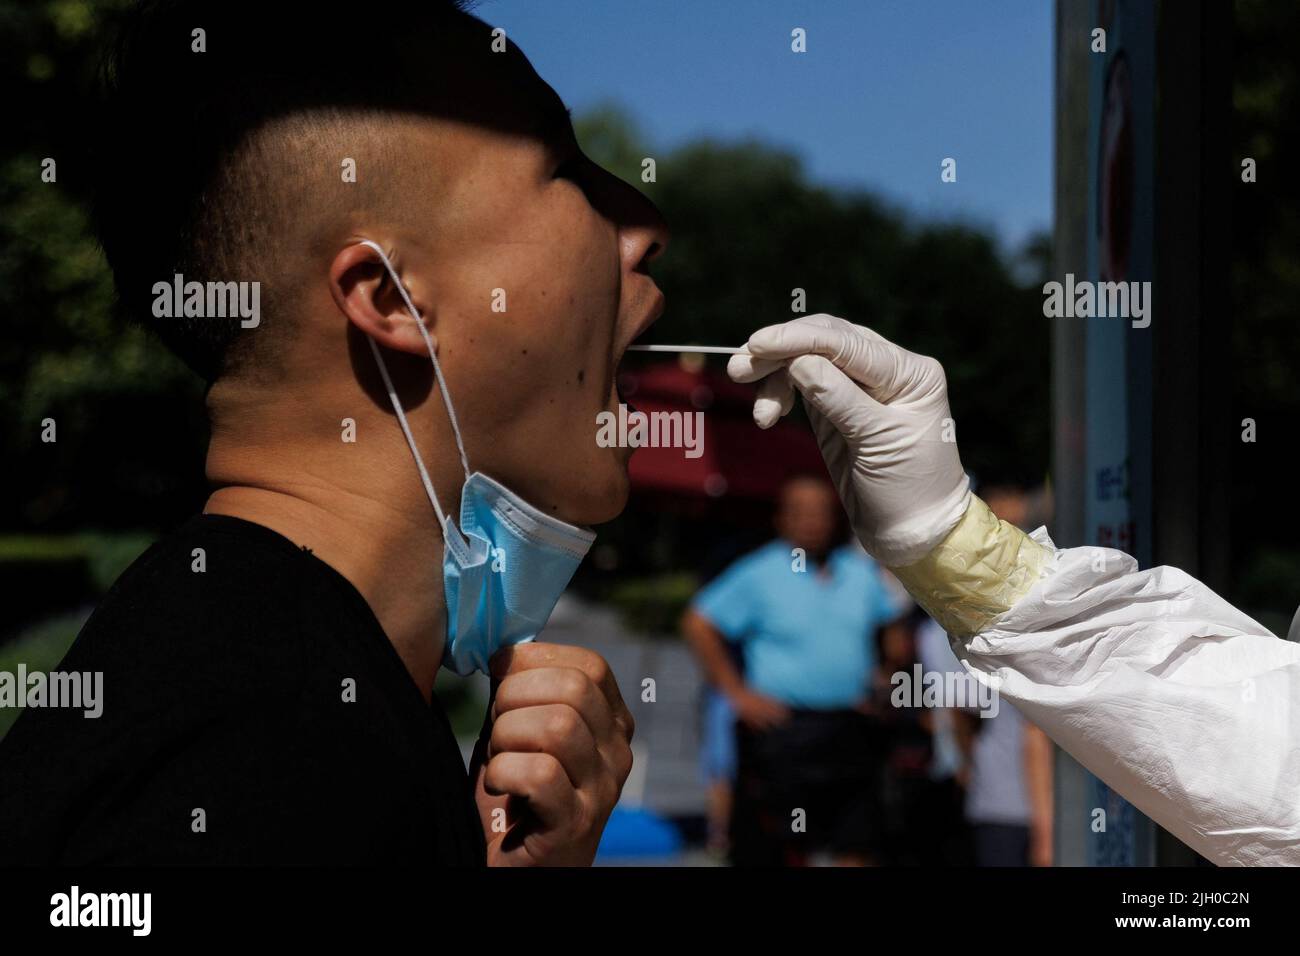 A man gets a swab test at a nucleic acid testing station, following a coronavirus disease (COVID-19) outbreak, in Beijing, China, July 14, 2022. REUTERS/Thomas Peter Stock Photo